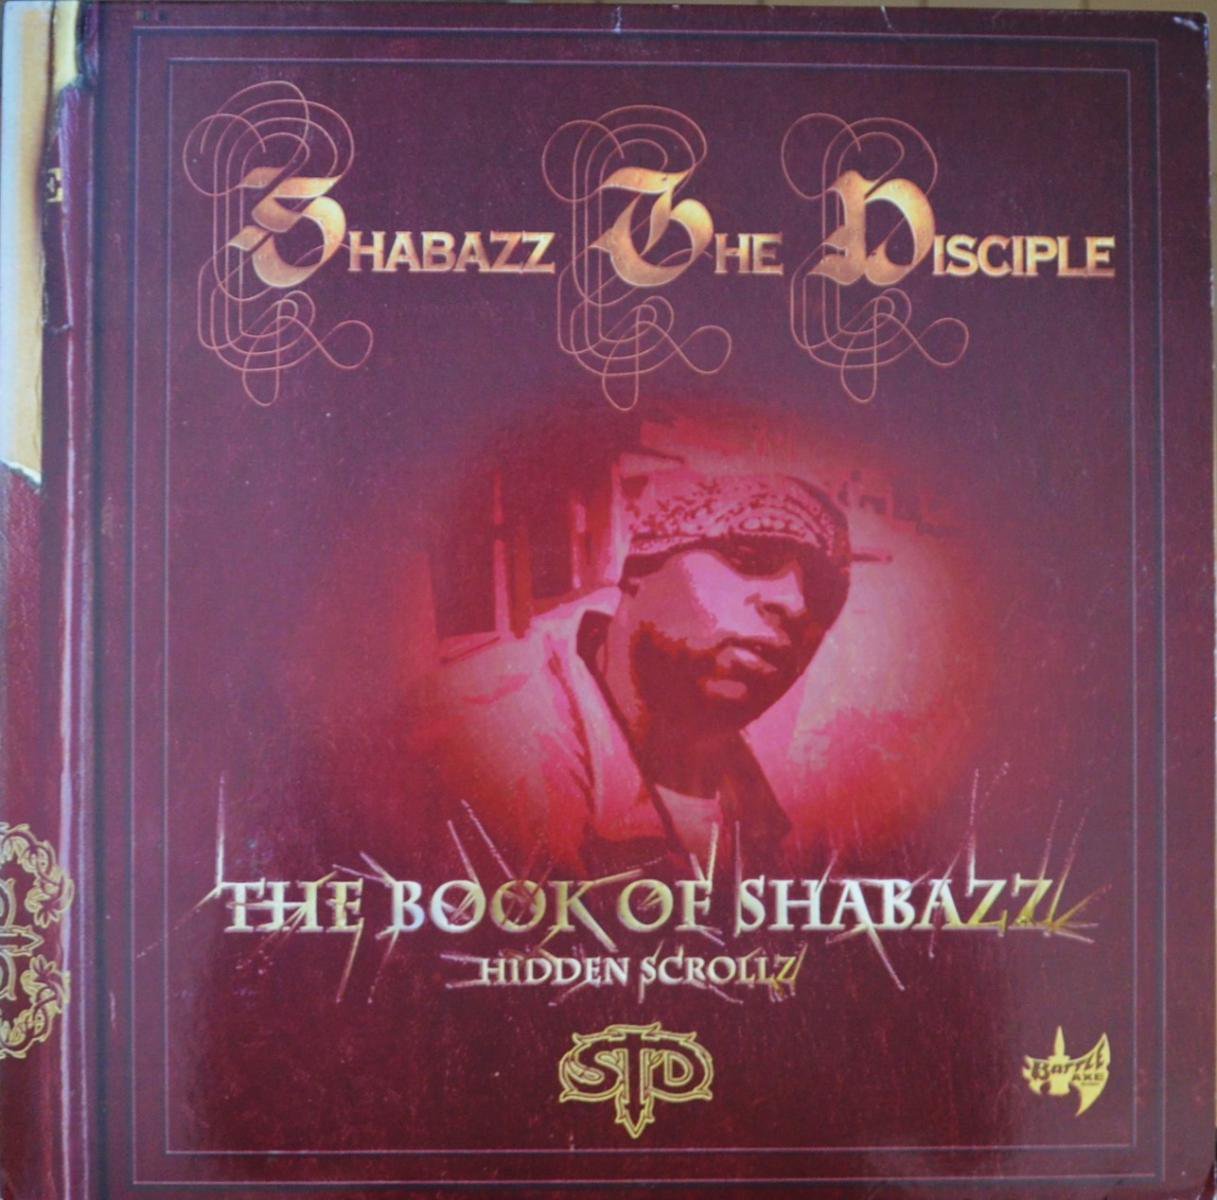 SHABAZZ THE DISCIPLE / THE BOOK OF SHABAZZ (HIDDEN SCROLLZ) (2LP)